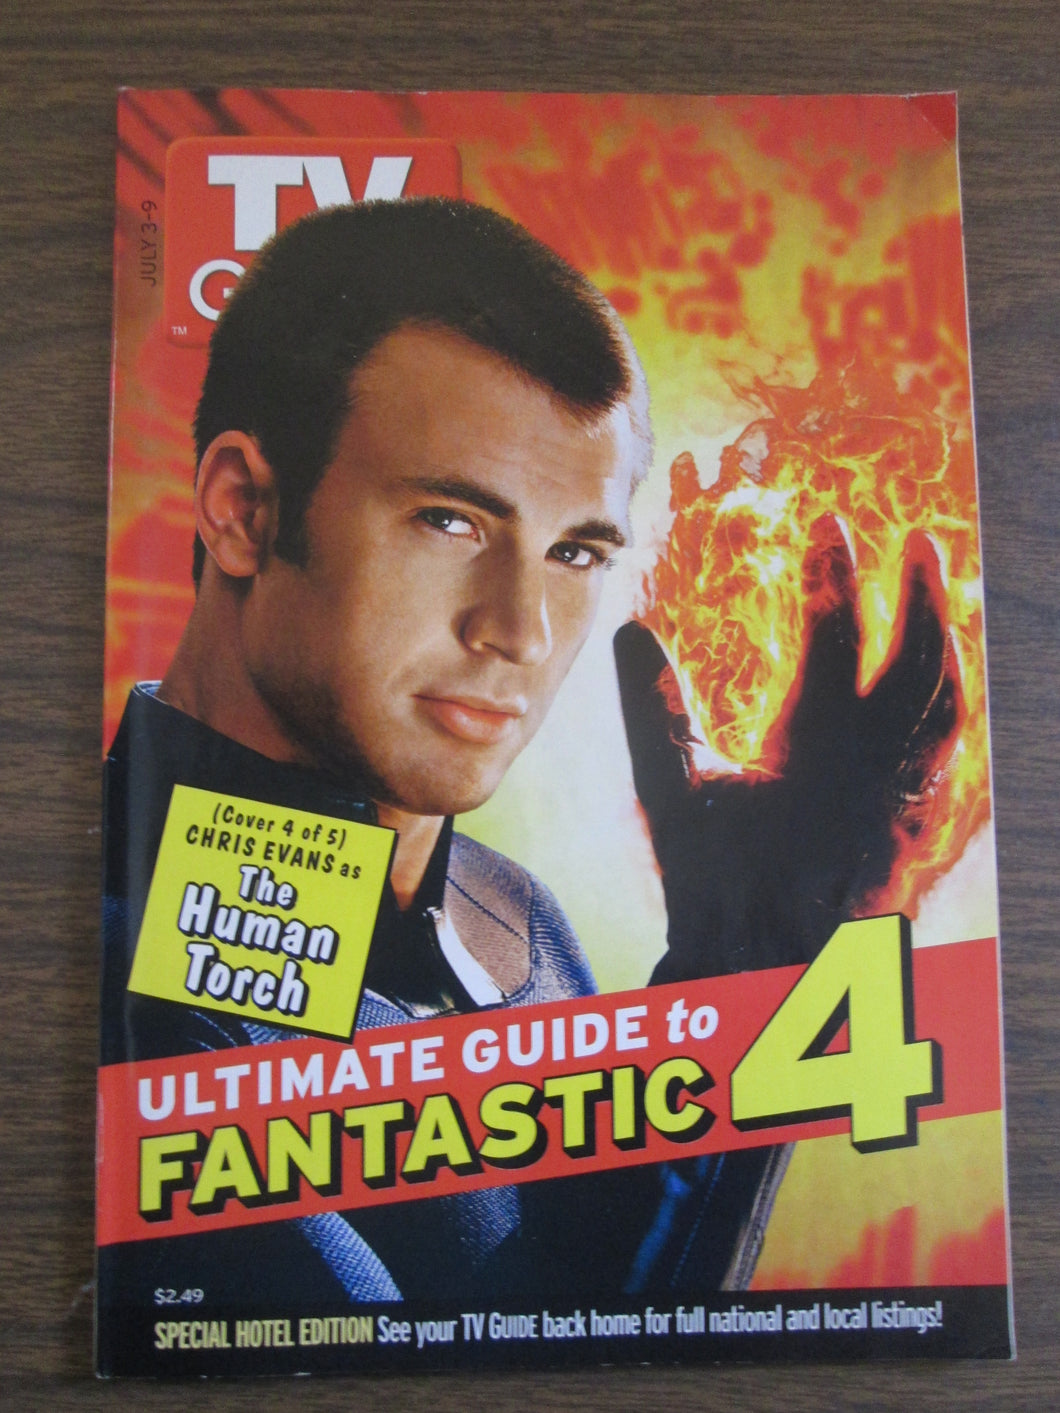 TV Guide Ultimate Guide to Fantastic Four Chris Evans Cover #4 Special Hotel Edition July 3-9, 2005